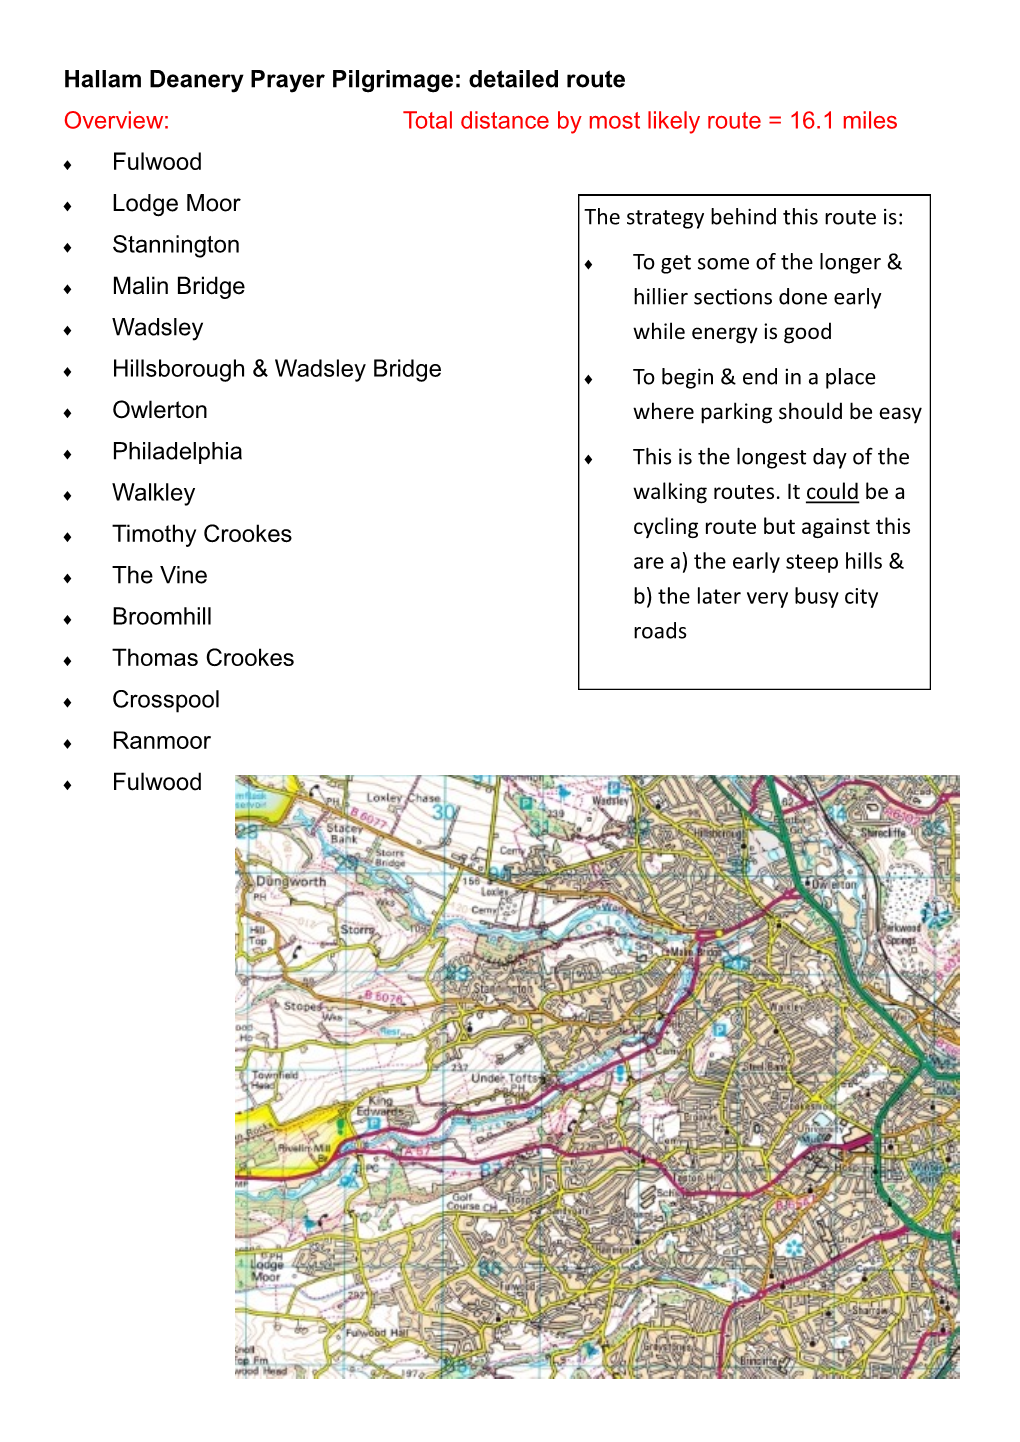 Hallam Deanery Prayer Pilgrimage: Detailed Route Overview: Total Distance by Most Likely Route = 16.1 Miles